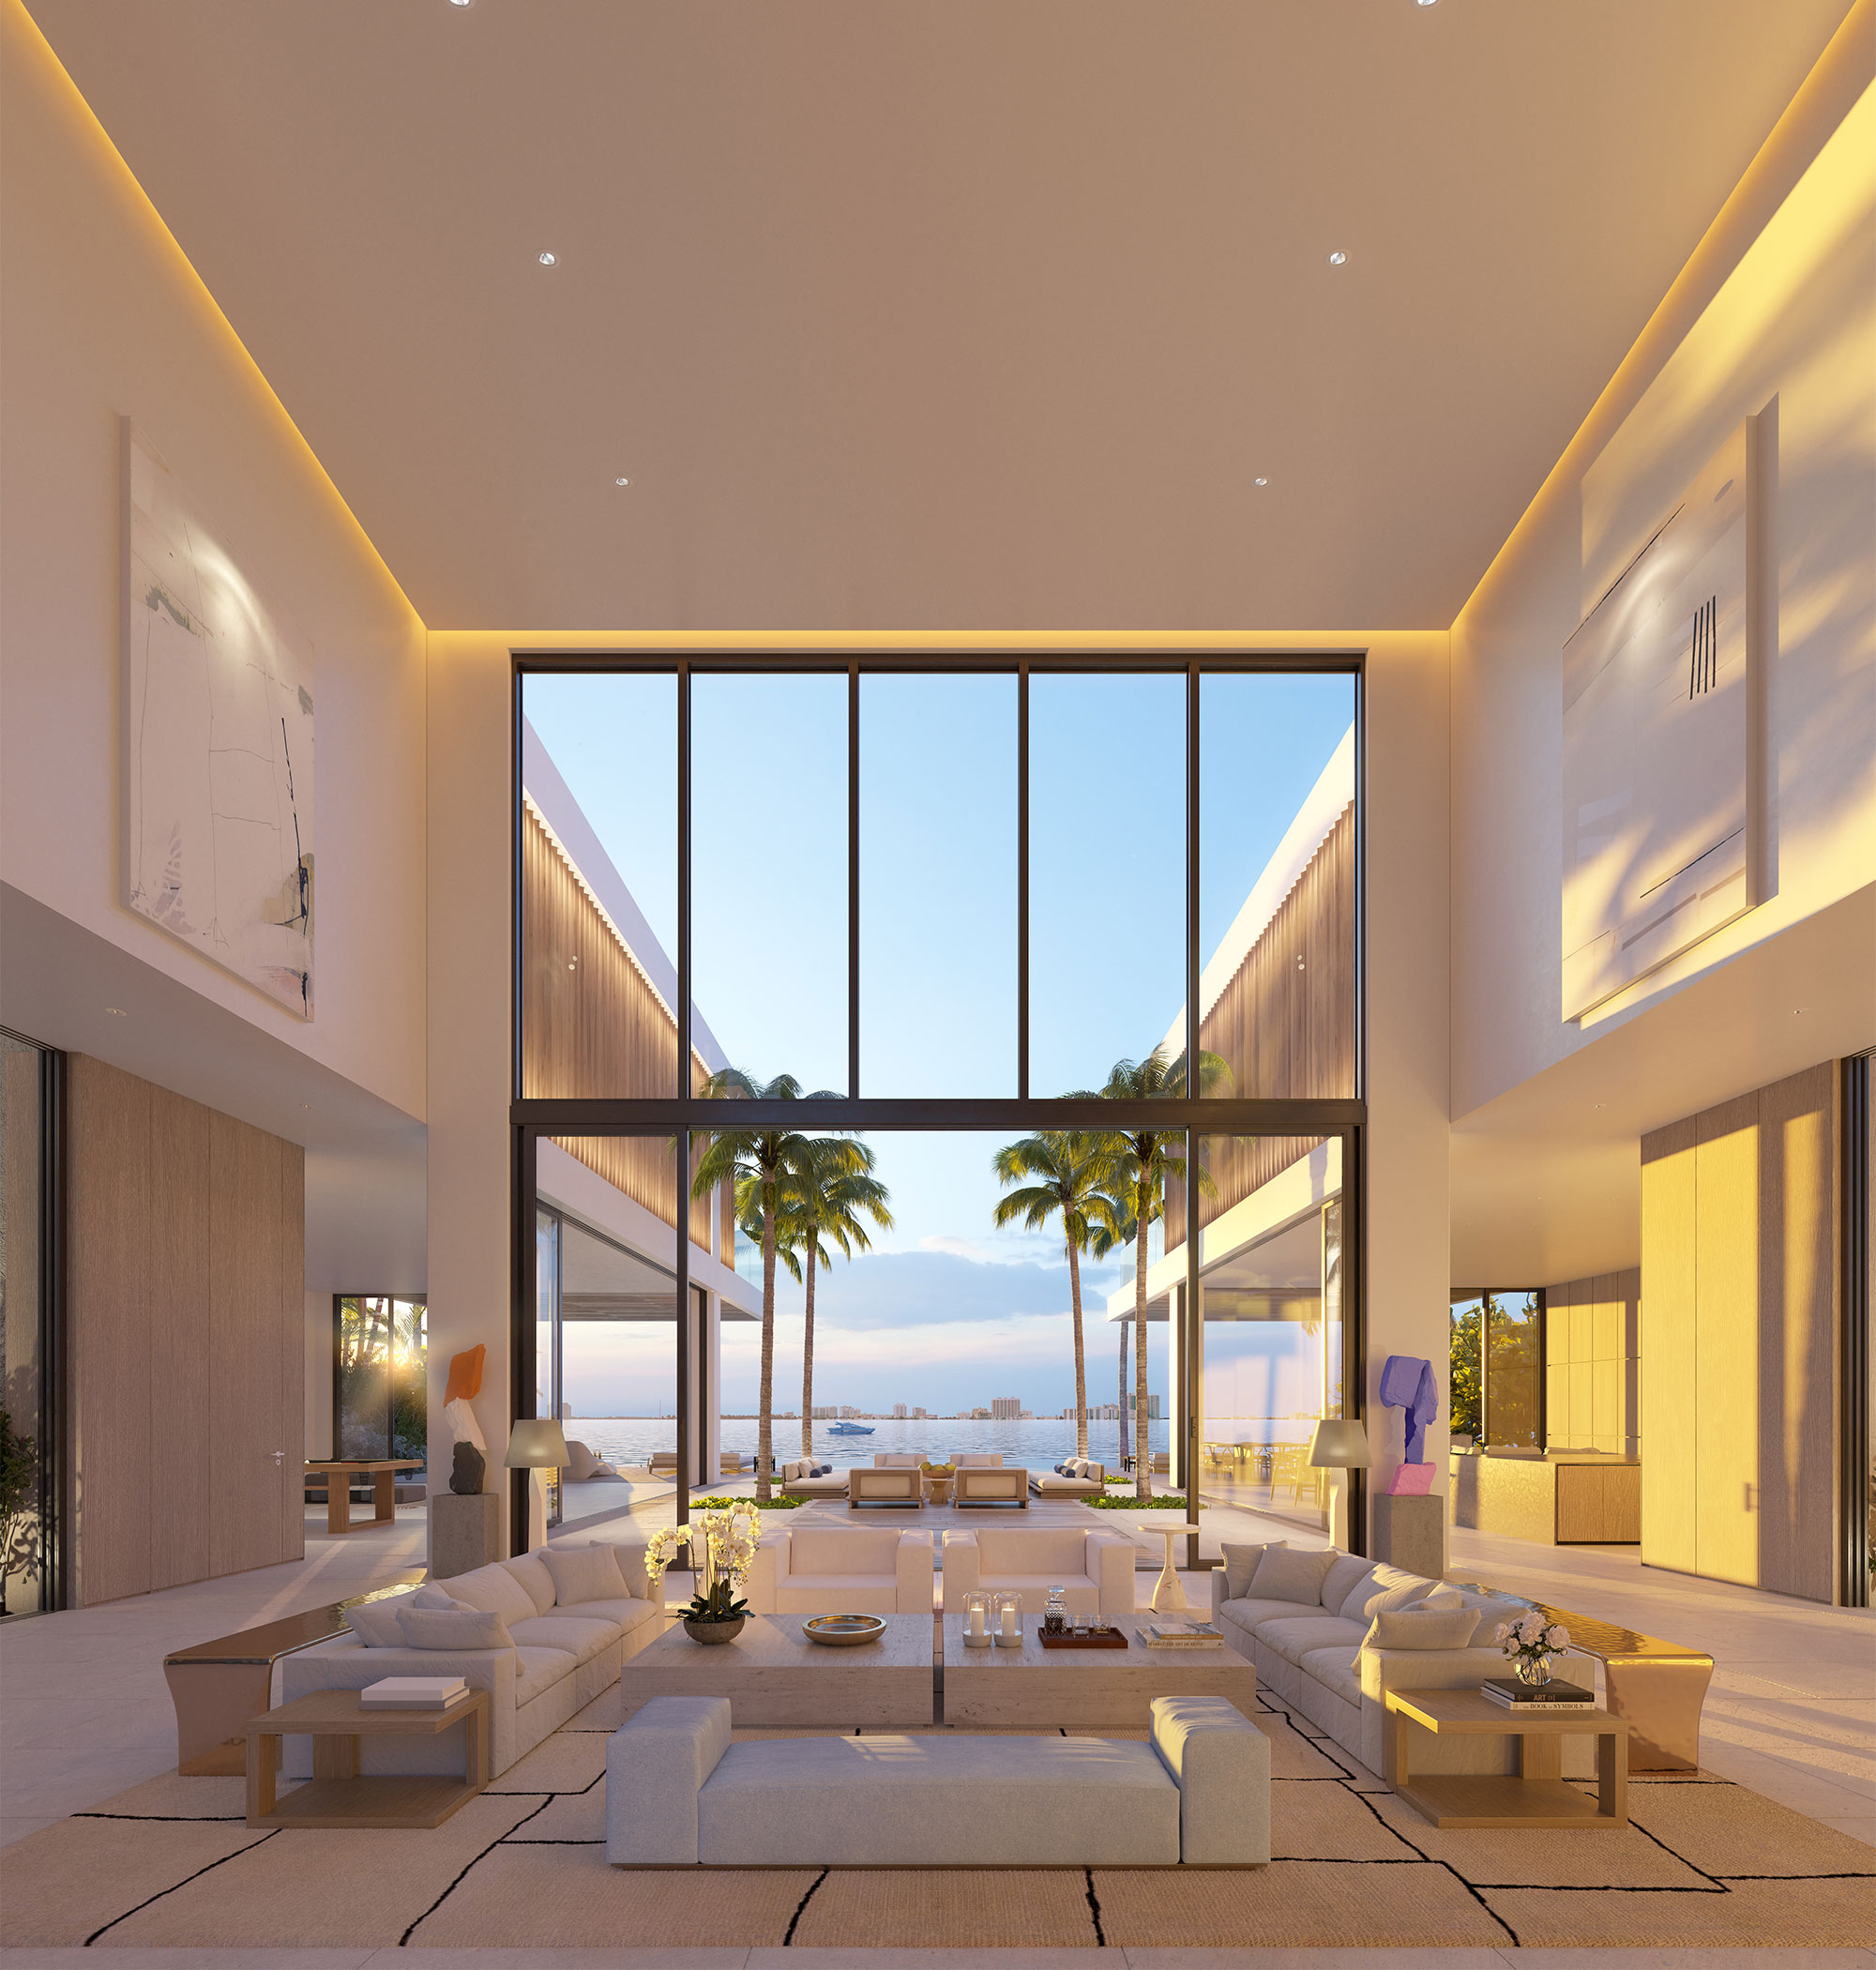 Architectural Rendering of the living room of the North Bay Road project located in Miami